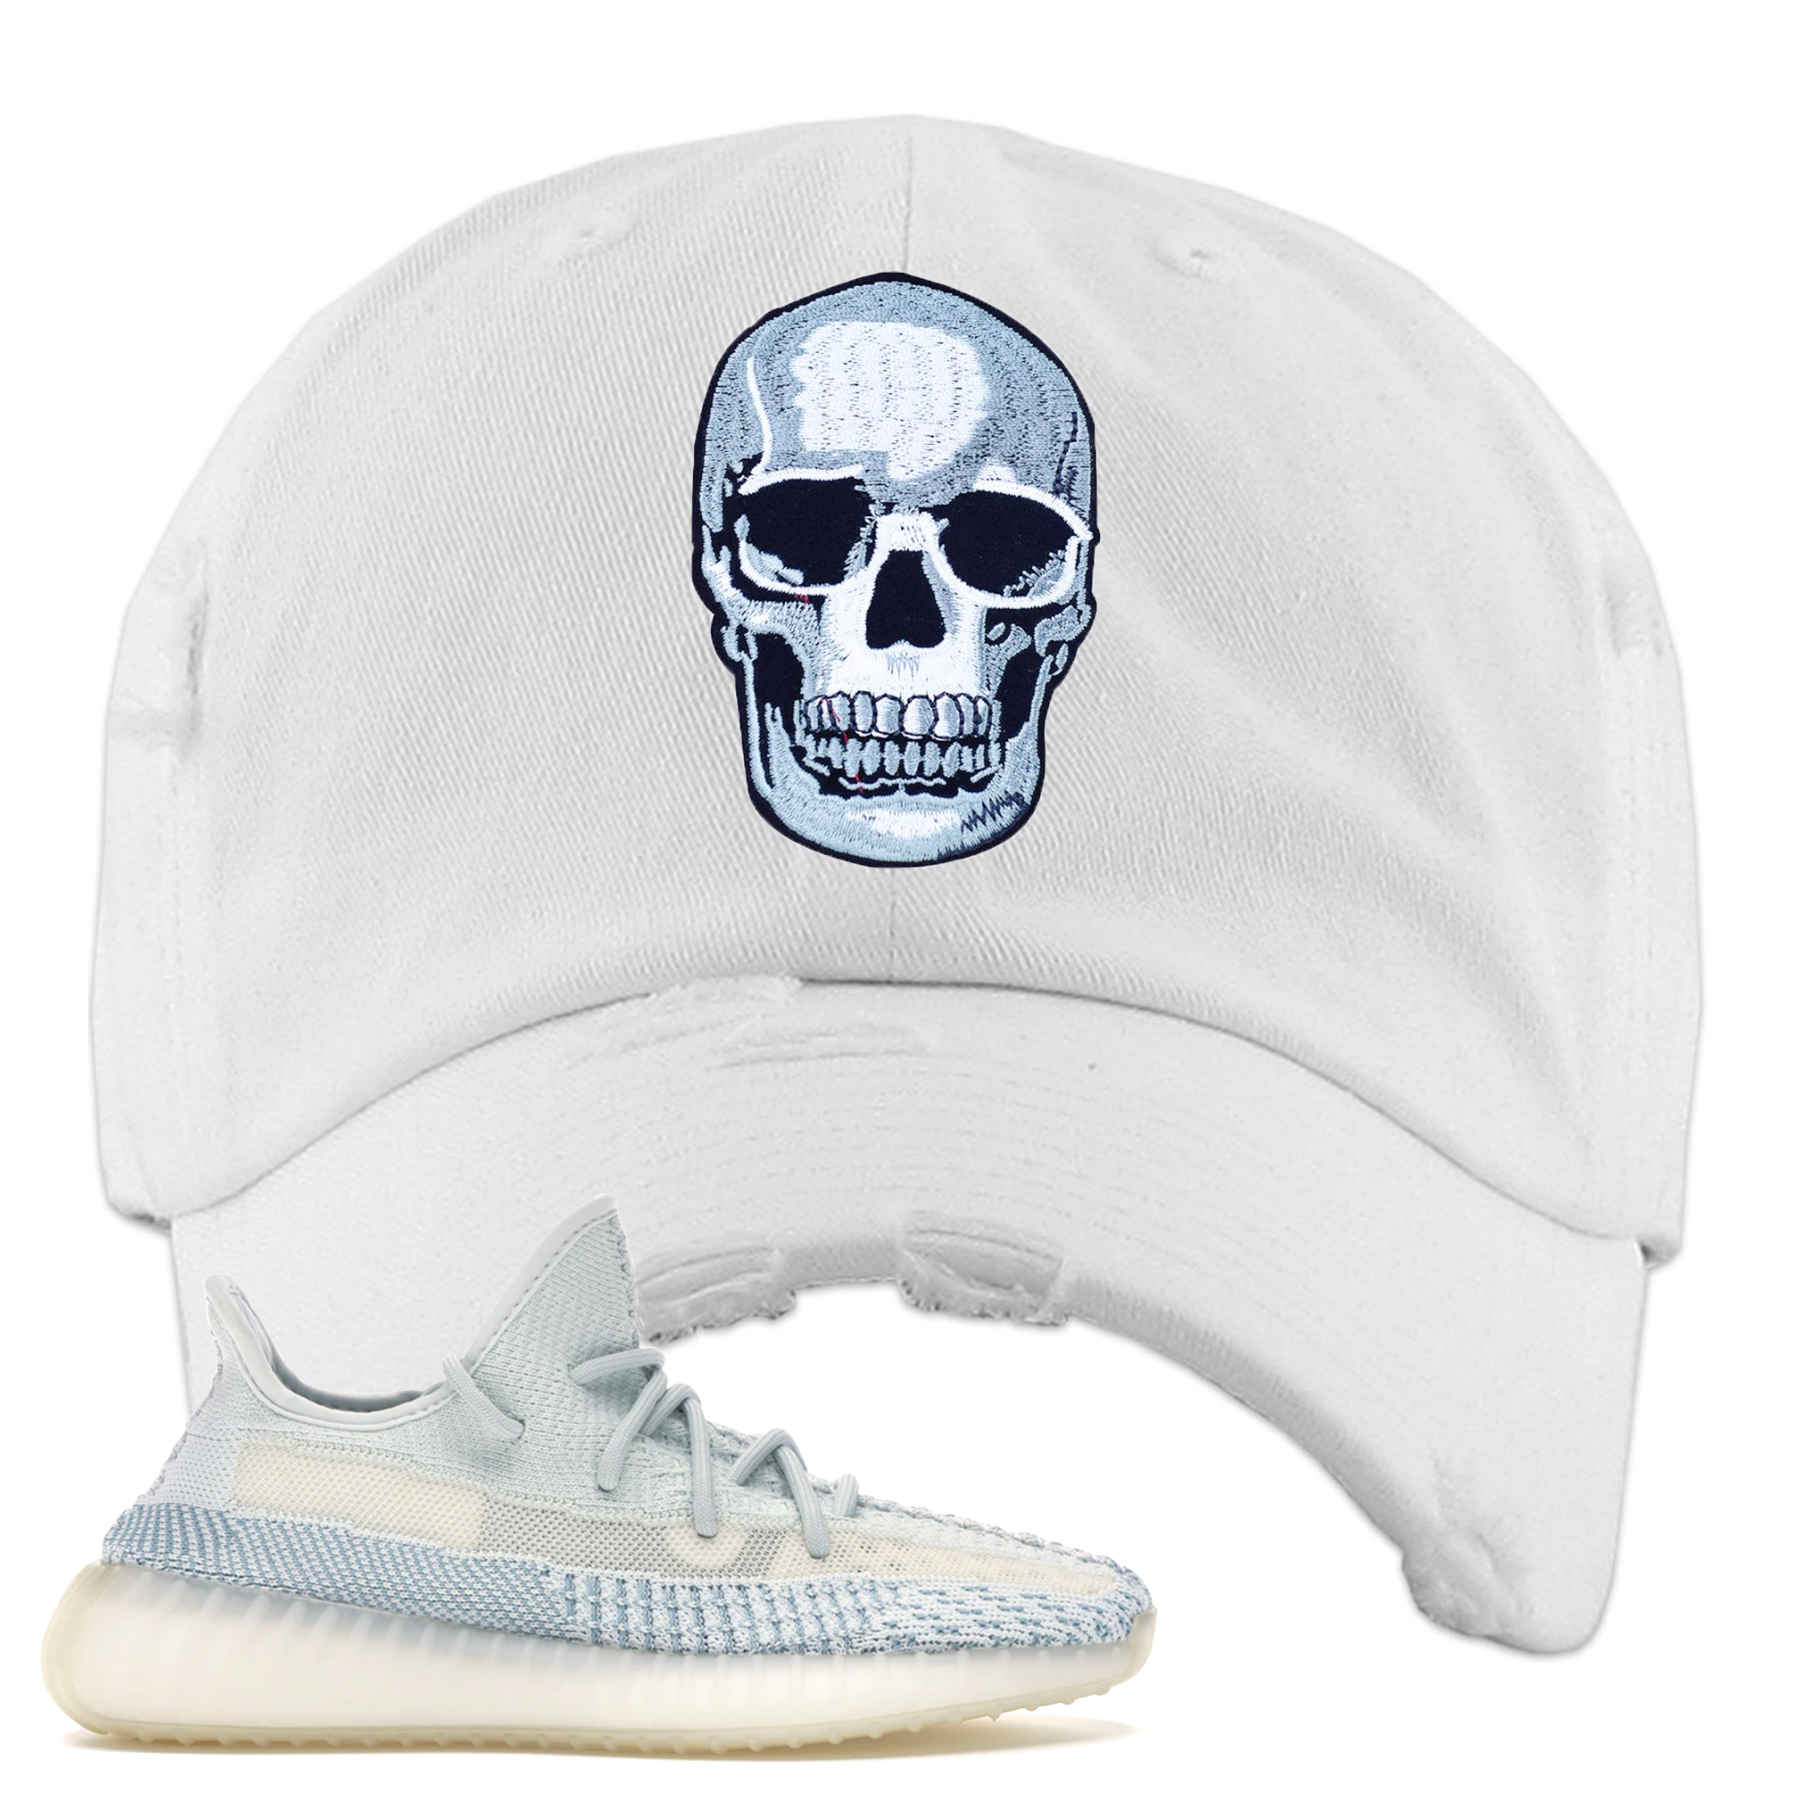 Yeezy Boost 350 V2 Cloud White Non-Reflective Skull Sneaker Matching White Distressed Dad Hat